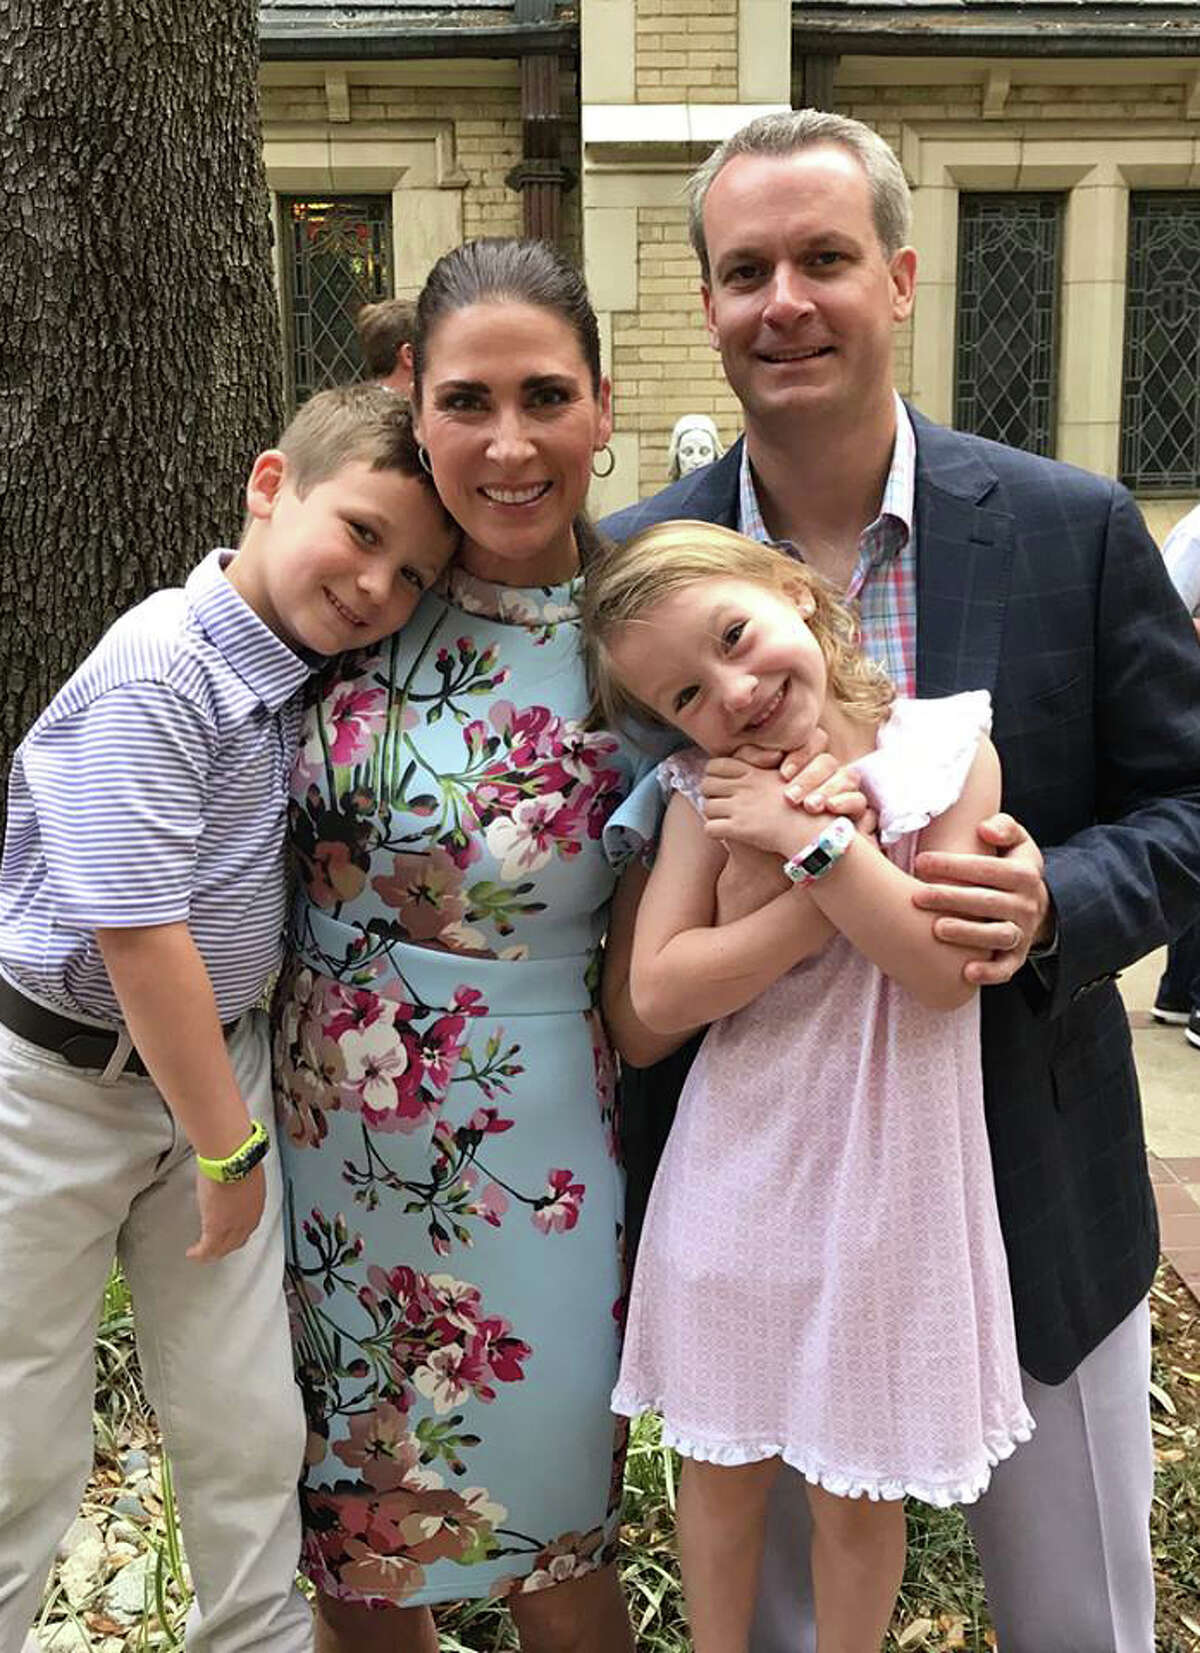 McCOY FAMILY: Fox Southwest Sportscaster and children’s book author Emily Jones McCoy is shown with her family: husband Mike McCoy and their children Henry and Hattie